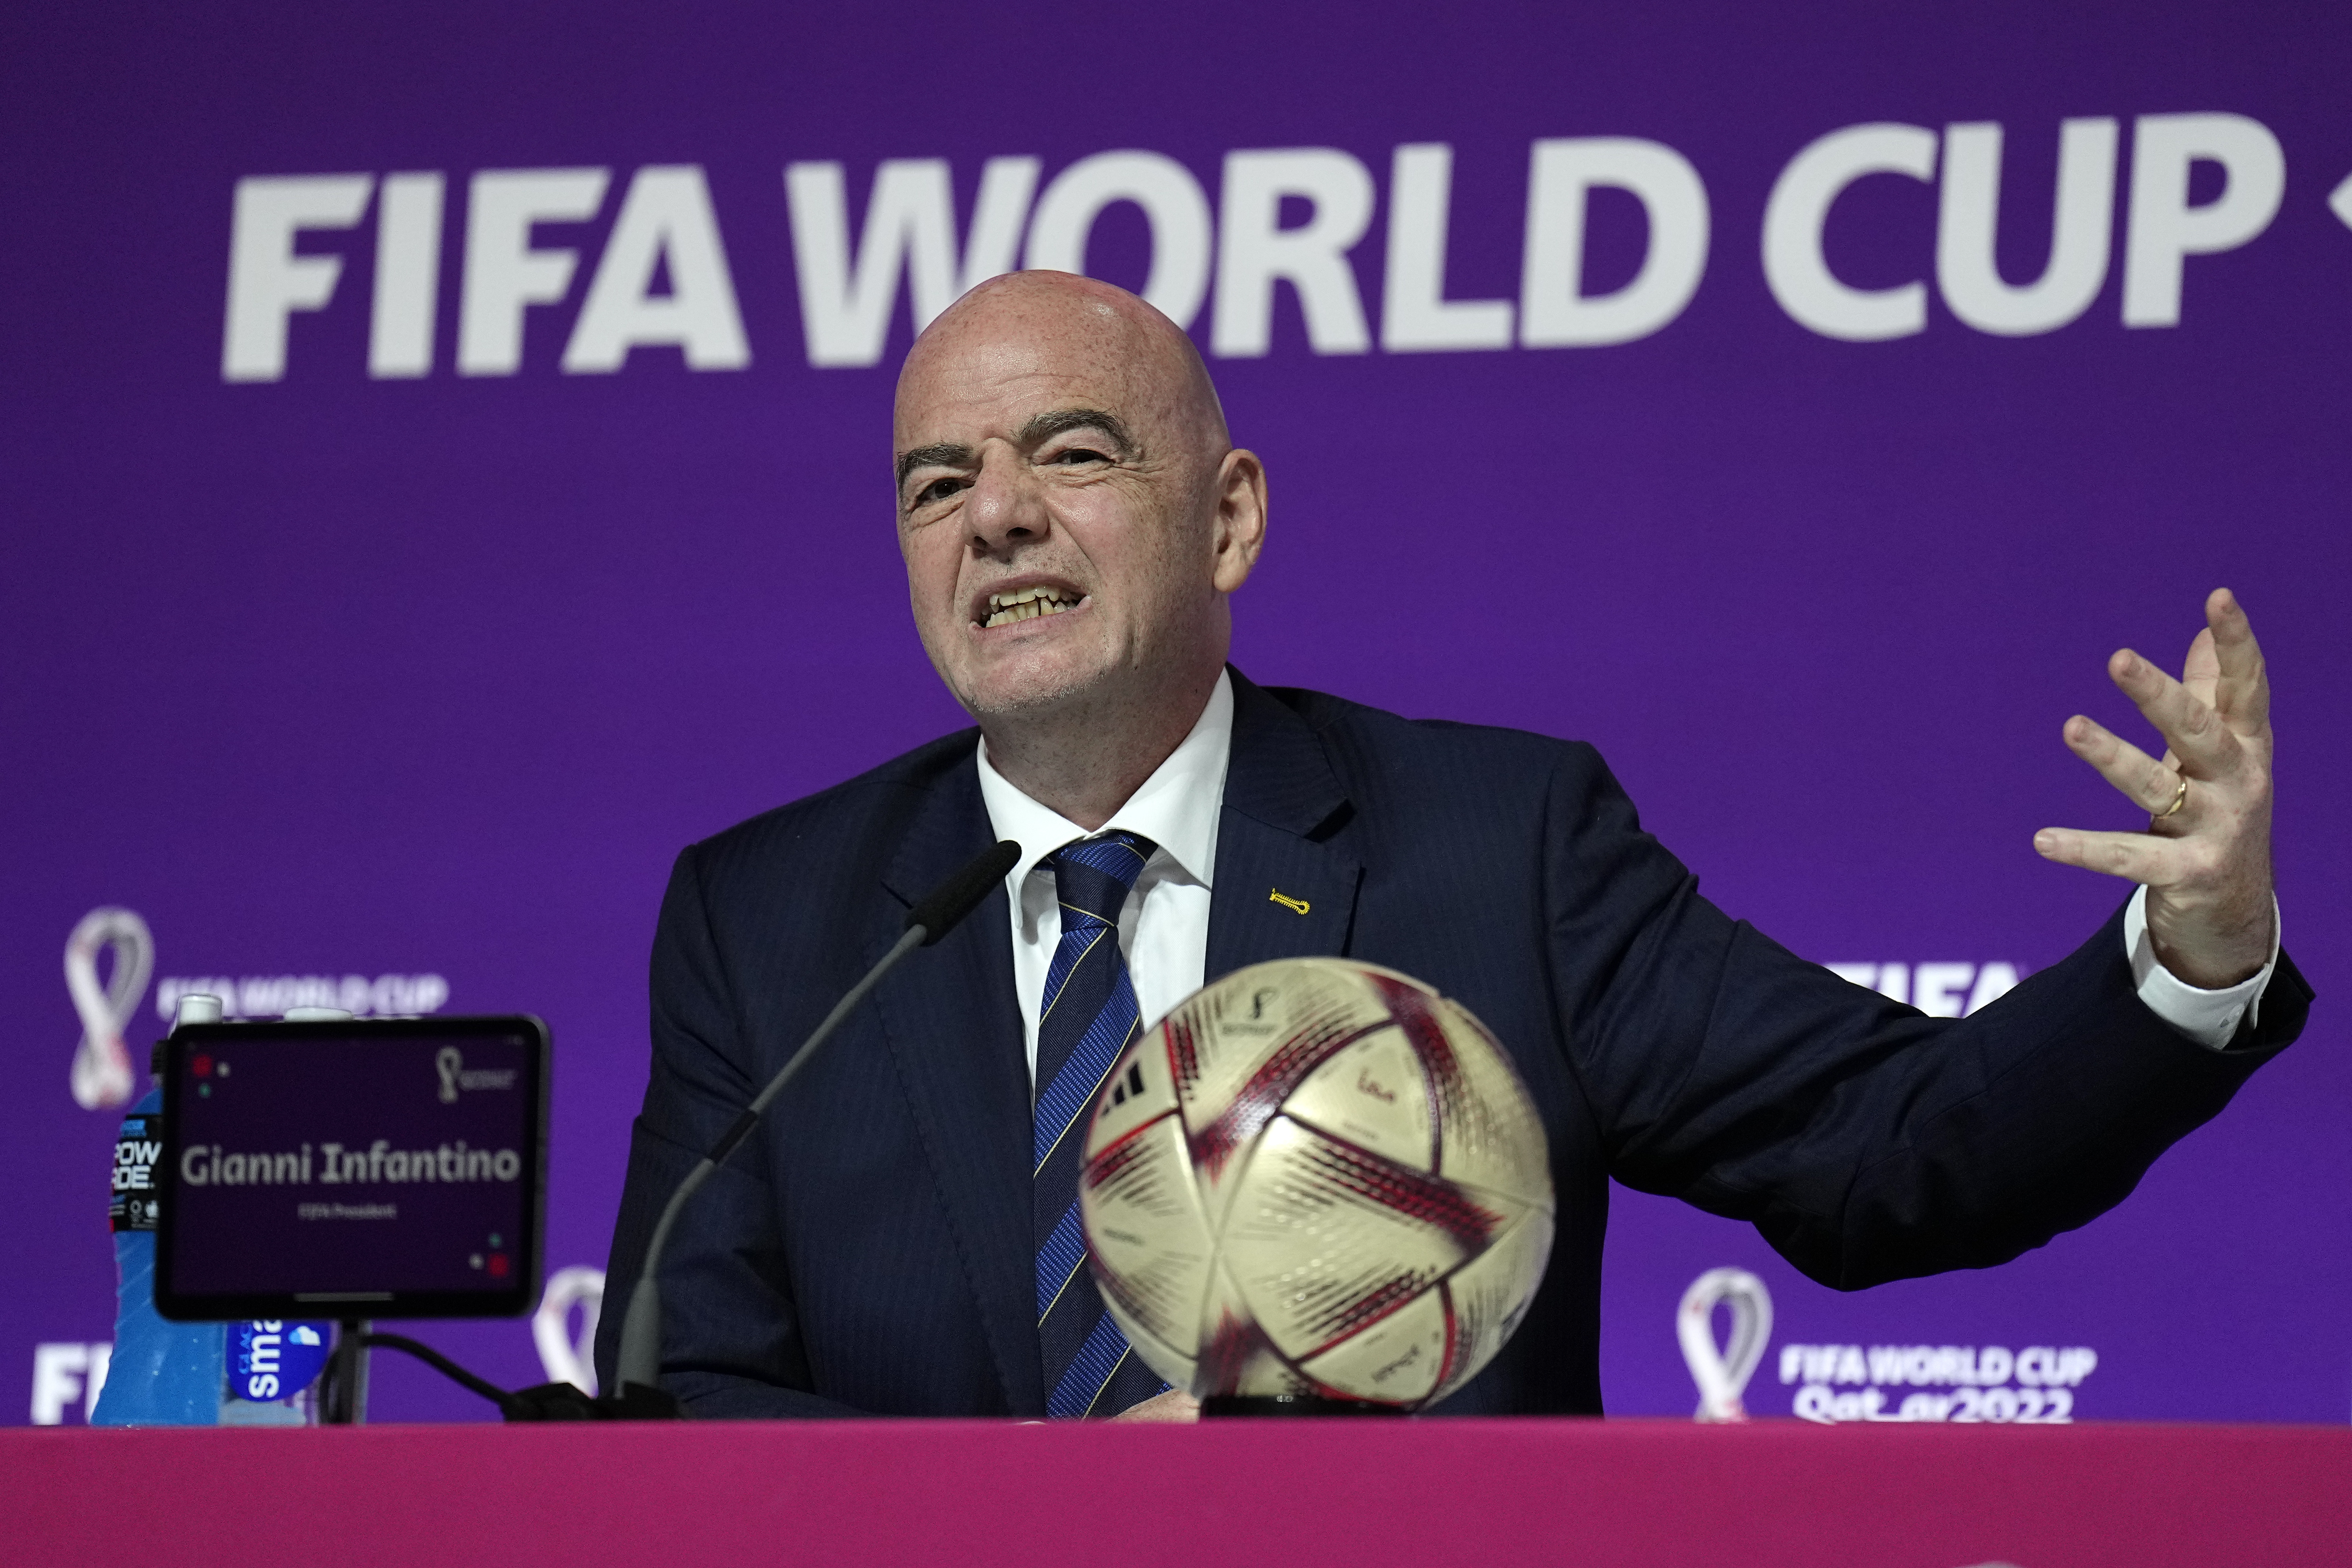 In a photo from December 16, 2022, FIFA President Gianni Infantino speaks at a press conference during the Qatar World Cup in Doha, Qatar. (AP Photo/Martin Meissner)